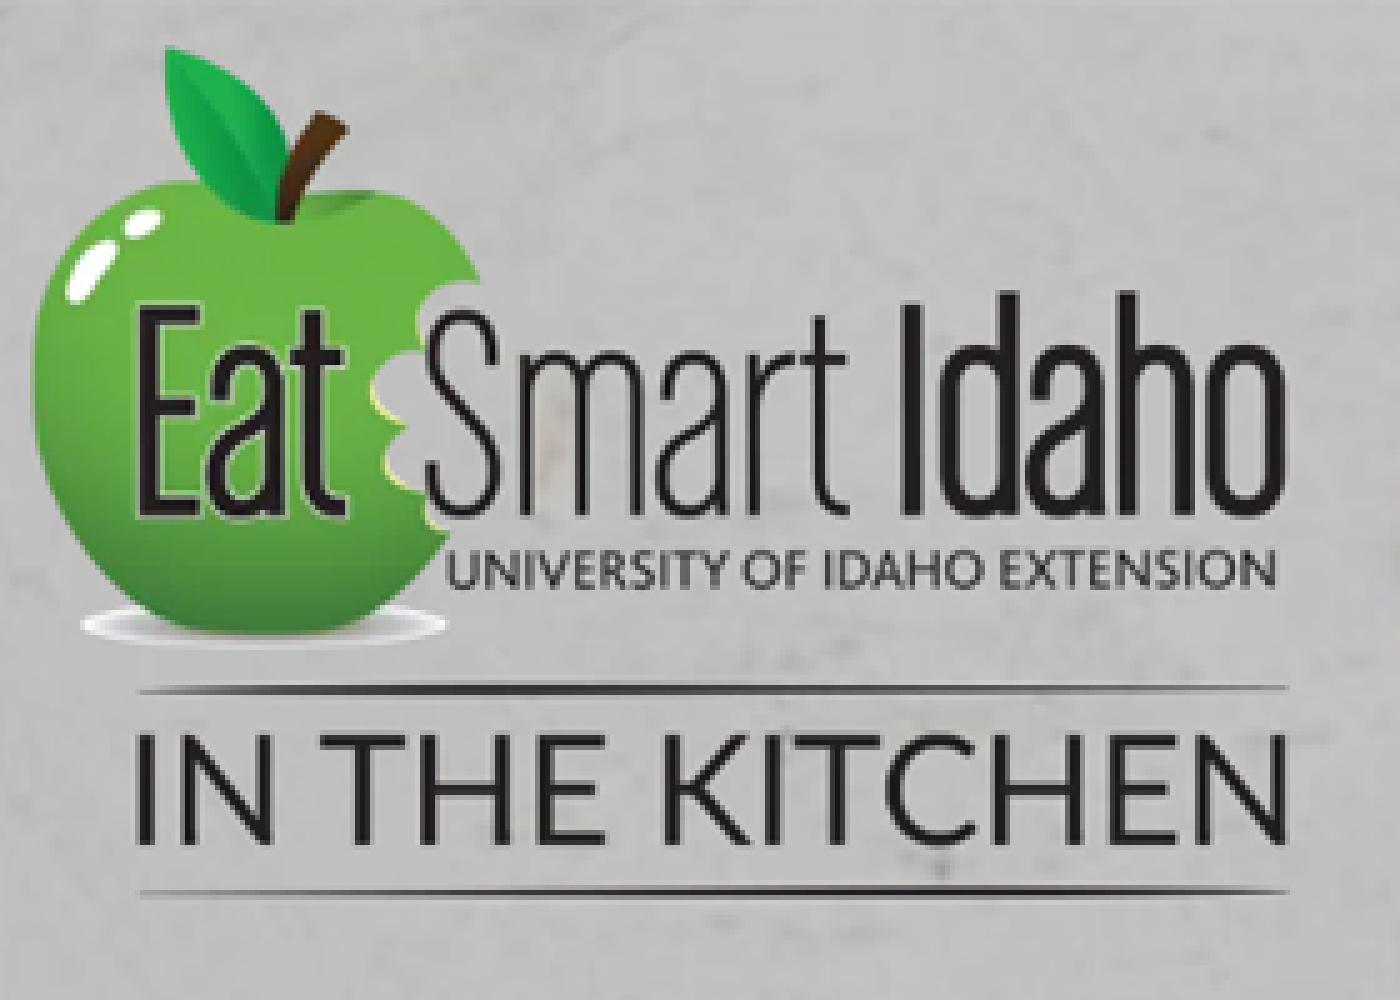 Eat Smart Idaho Univeristy of Idaho Extension In the Kitchen with a green apple with a bite taken out